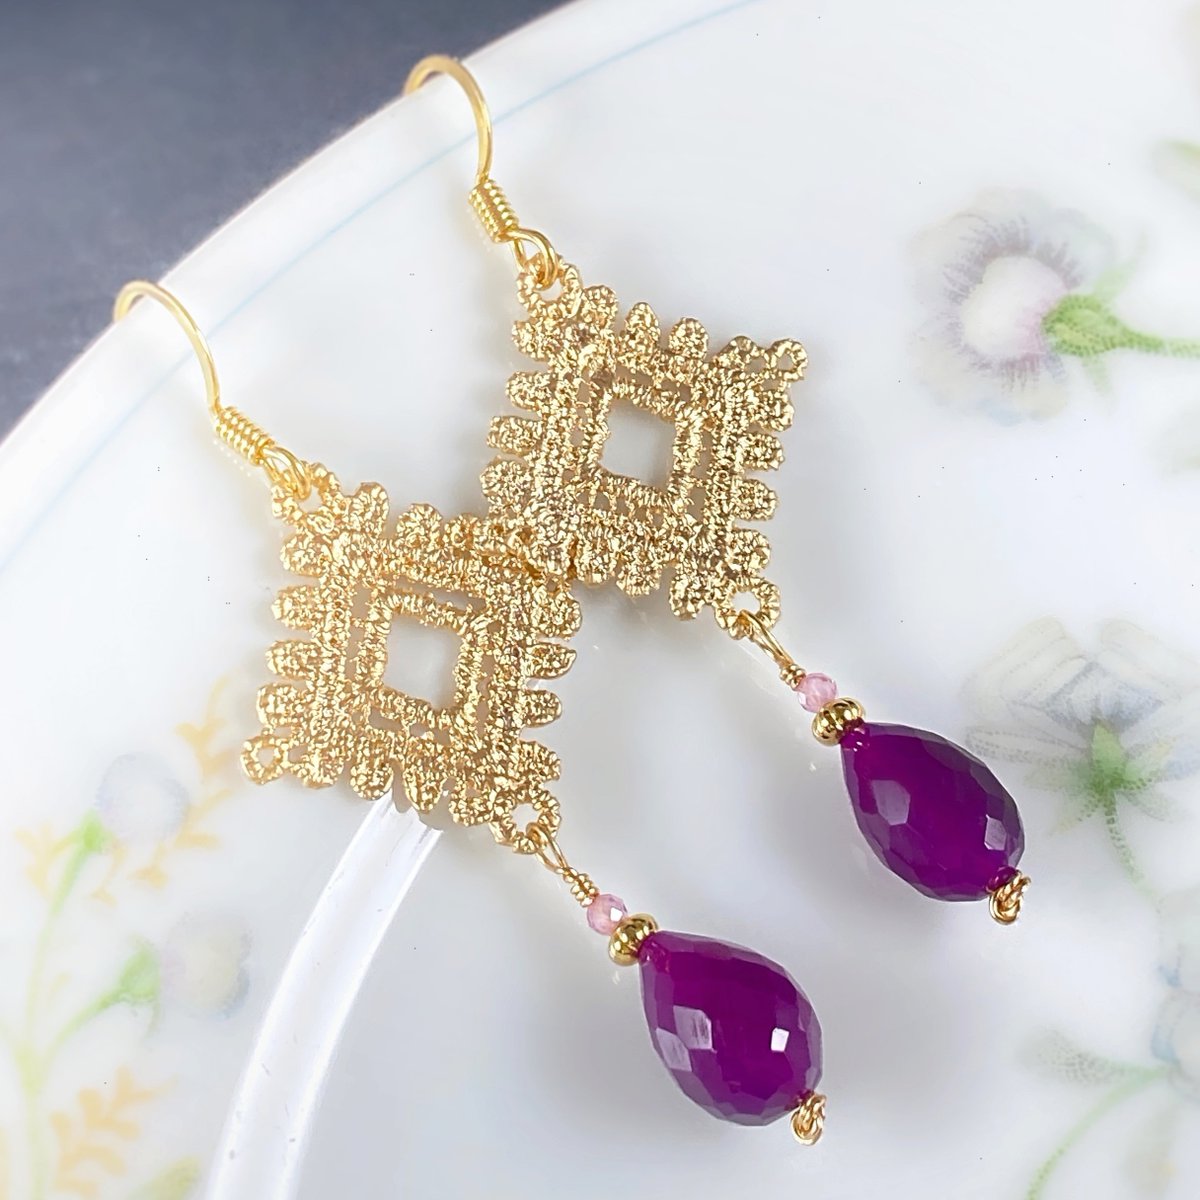 Treat yourself & save! Take 25% off at #MariesGems thru 1/15/23! Like these beautiful #PurpleChalcedony & #GoldFiligree earrings, just $20.99. Get free shipping with $35+.

etsy.com/listing/116671…

#TreatYourself #AfterChristmasSale #JanuarySale #25%Off #MagentaChalcedony